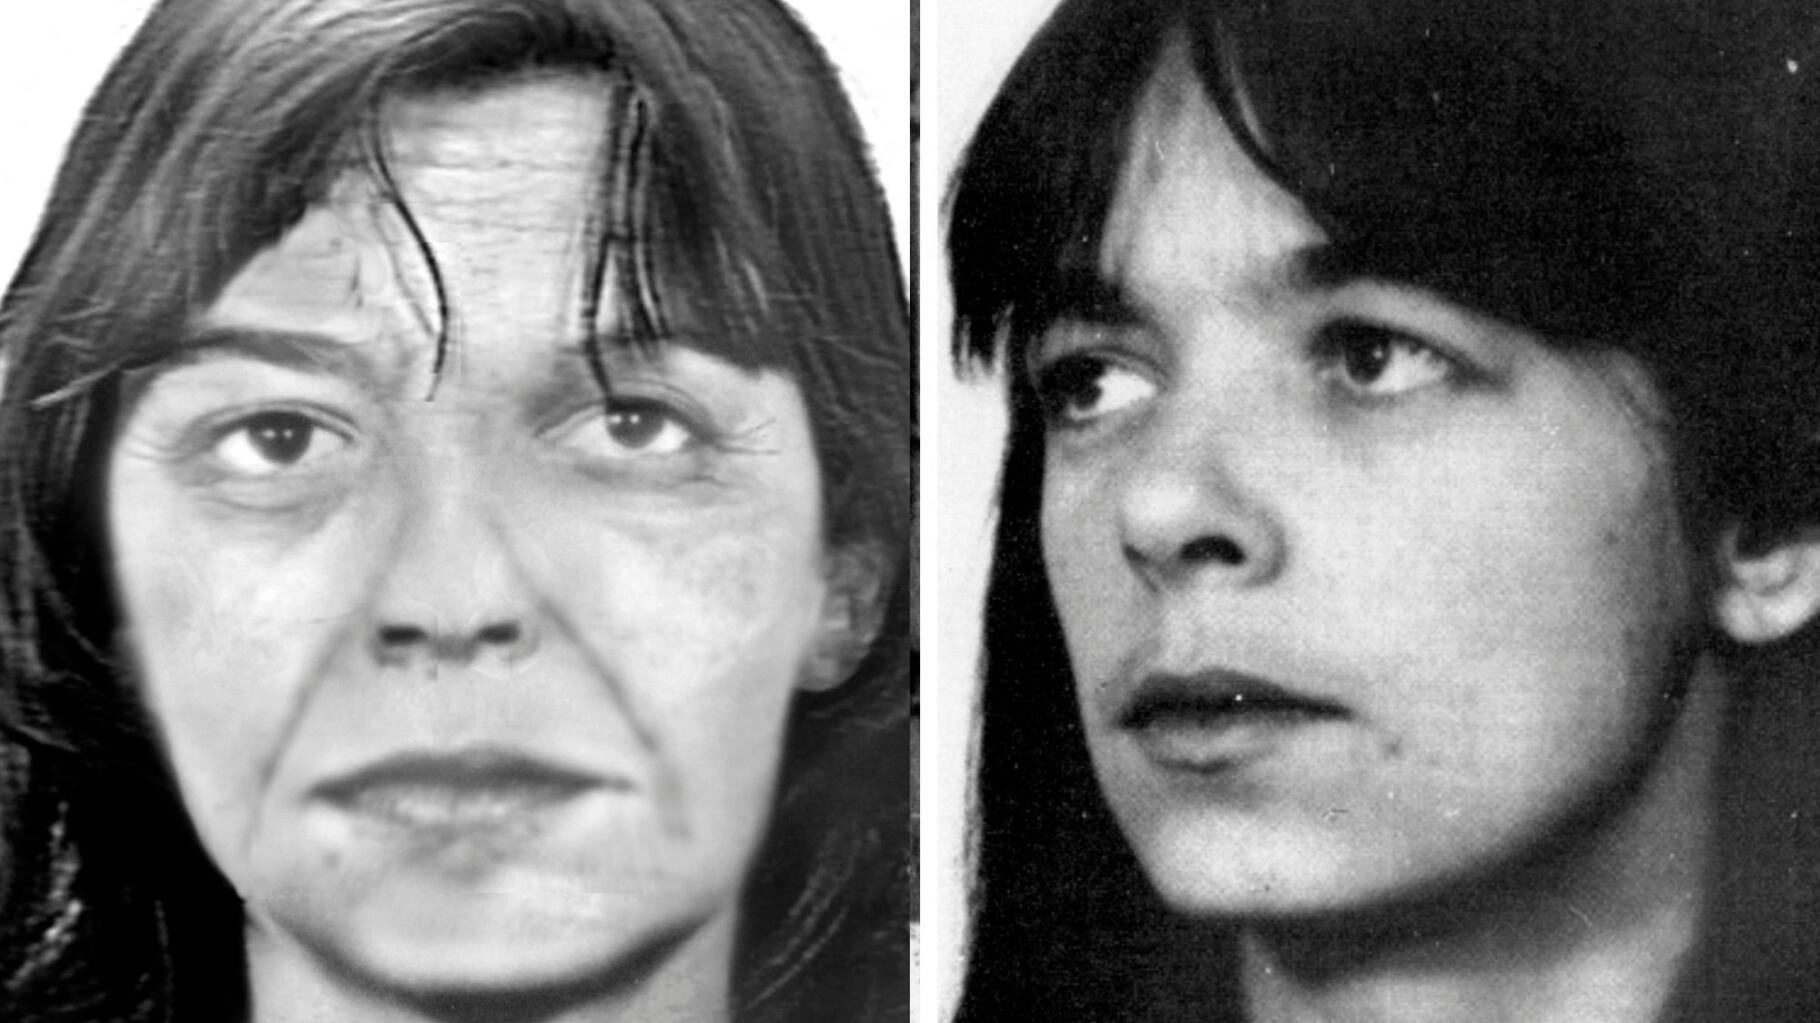 Daniela Klette, a former RAF member, has been wanted for 30 years, thanks to AI